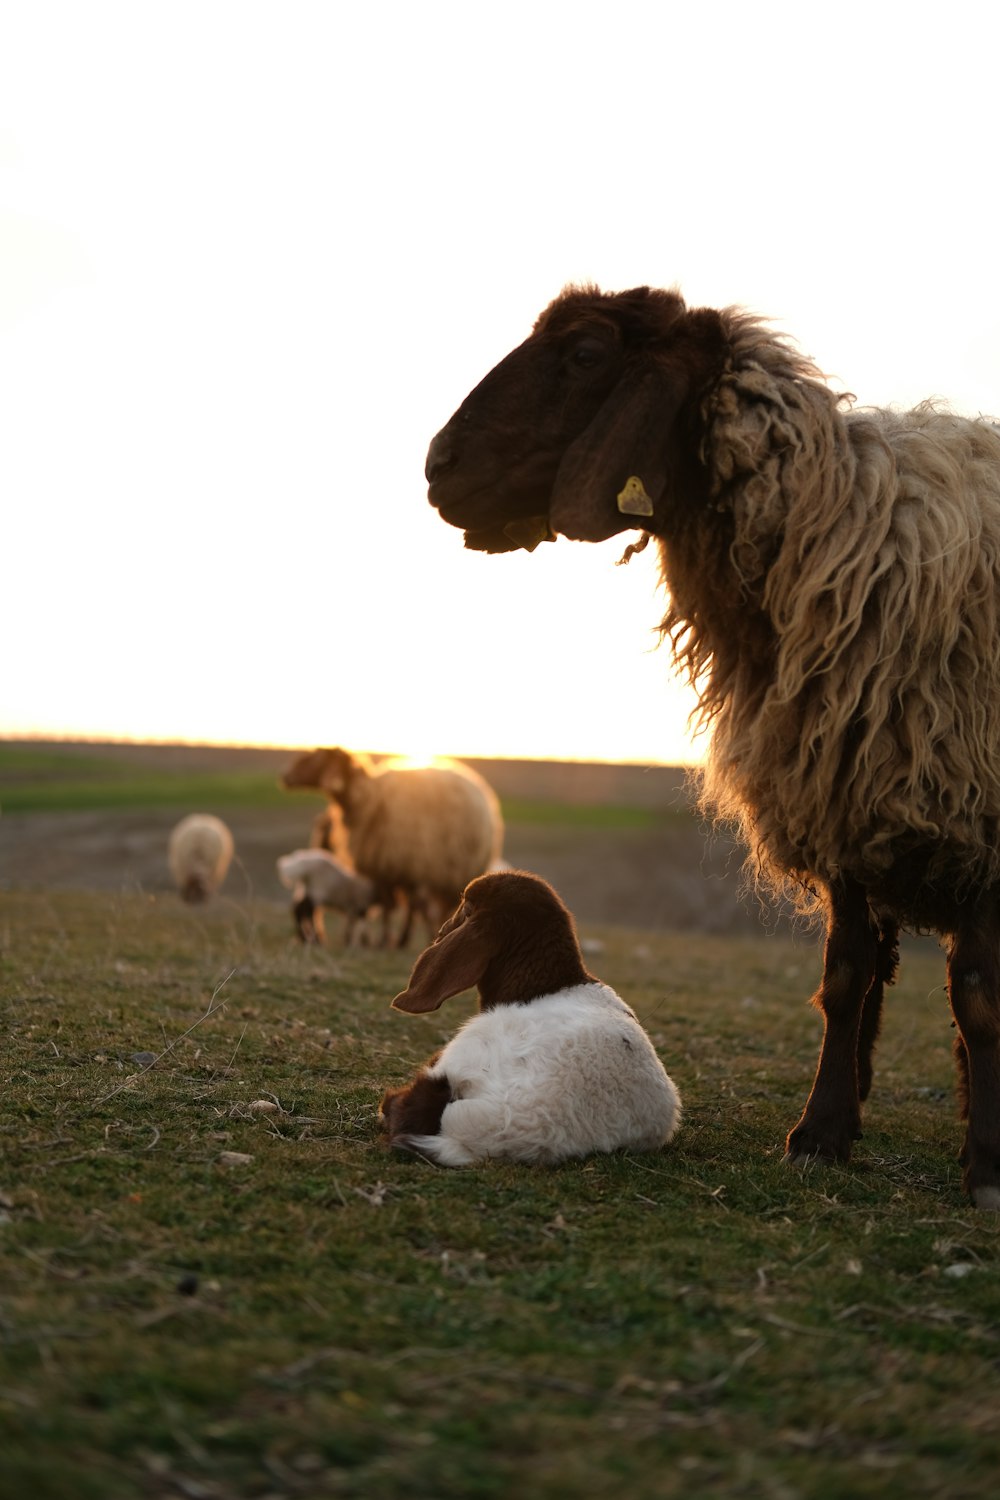 a sheep standing next to a dog on a lush green field